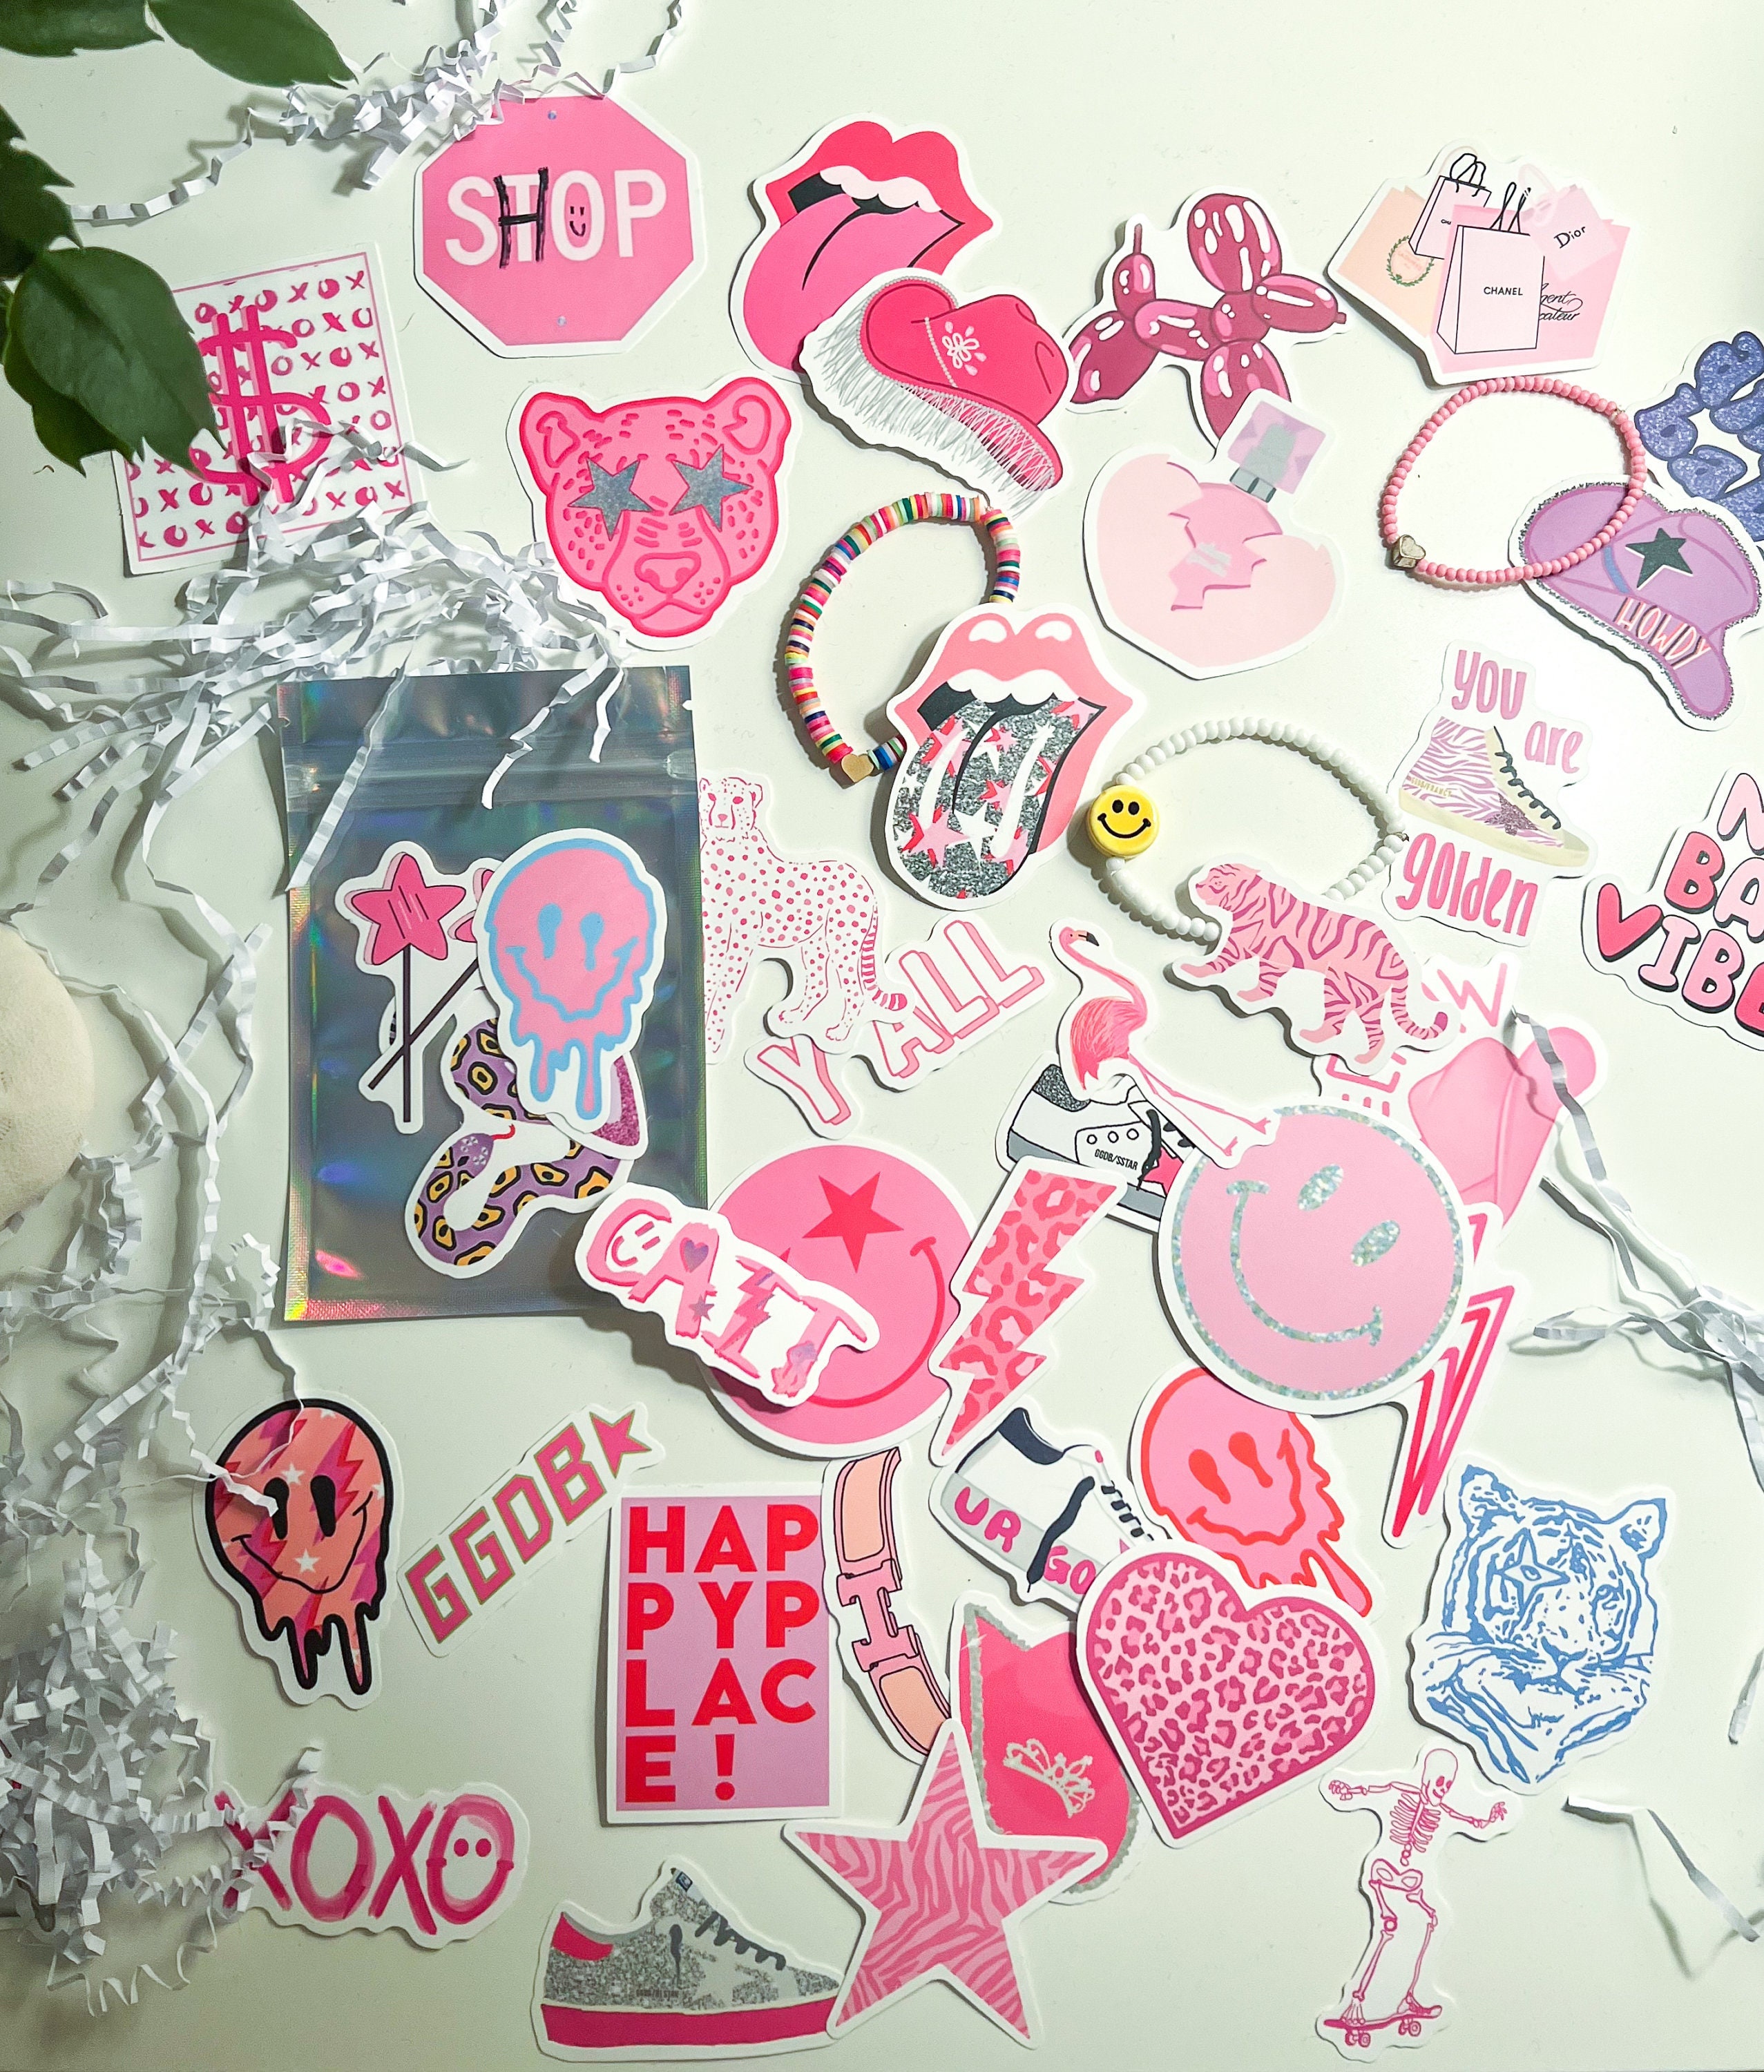 Preppy Stickers  Shop Preppy Stickers For Your School Life At A Cheap Price